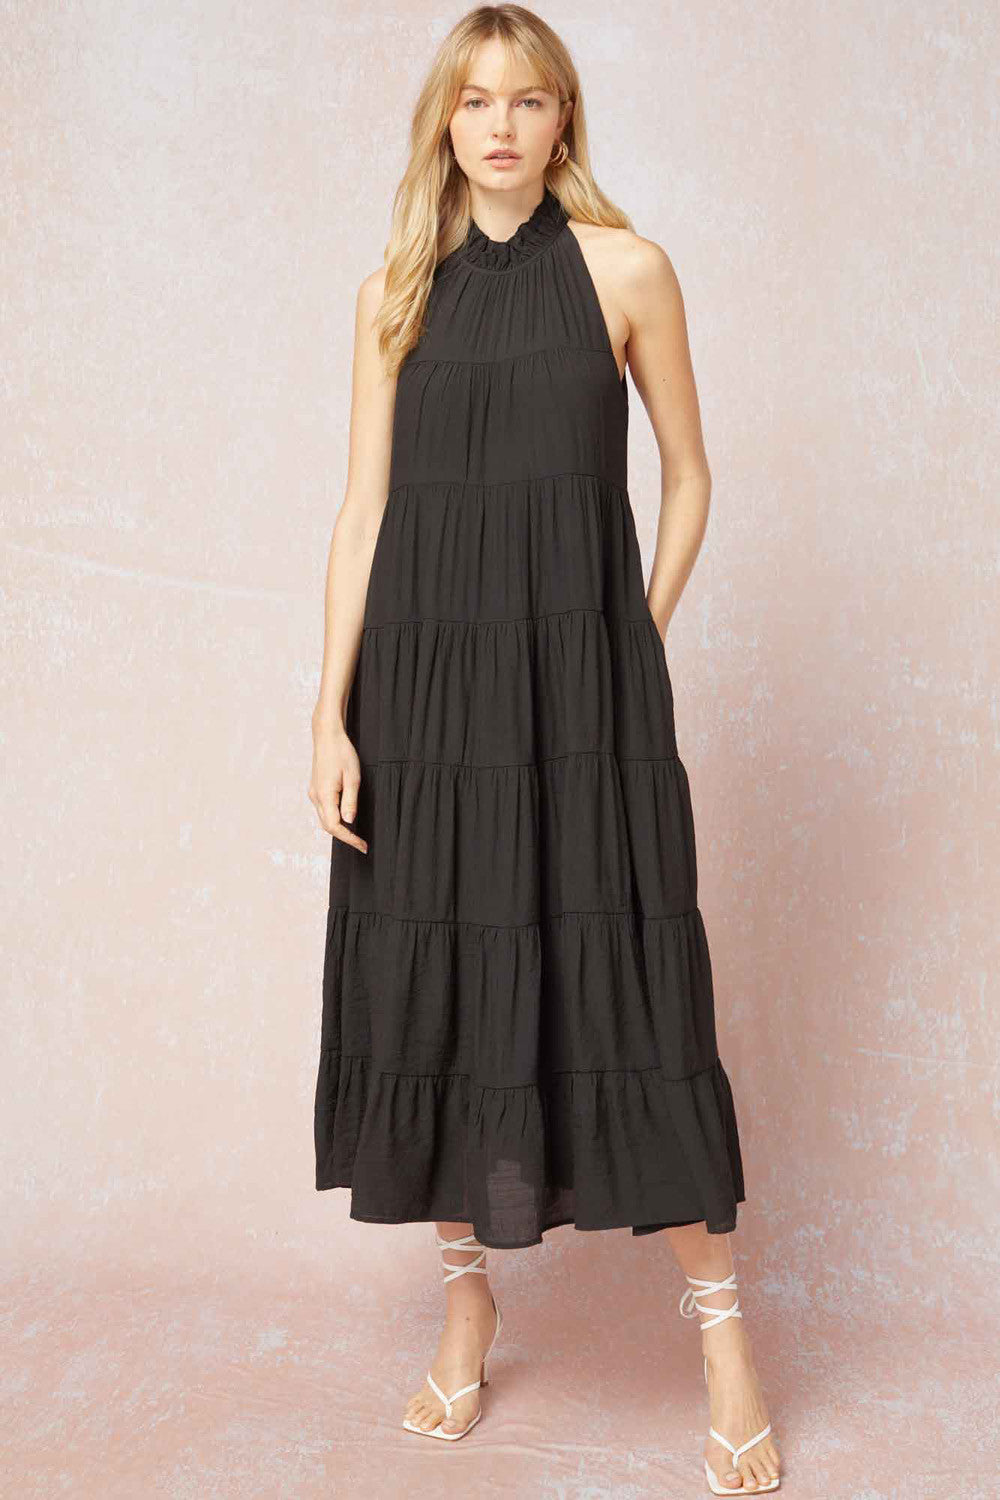 The Wendy Sleeveless Tiered Maxi Dress